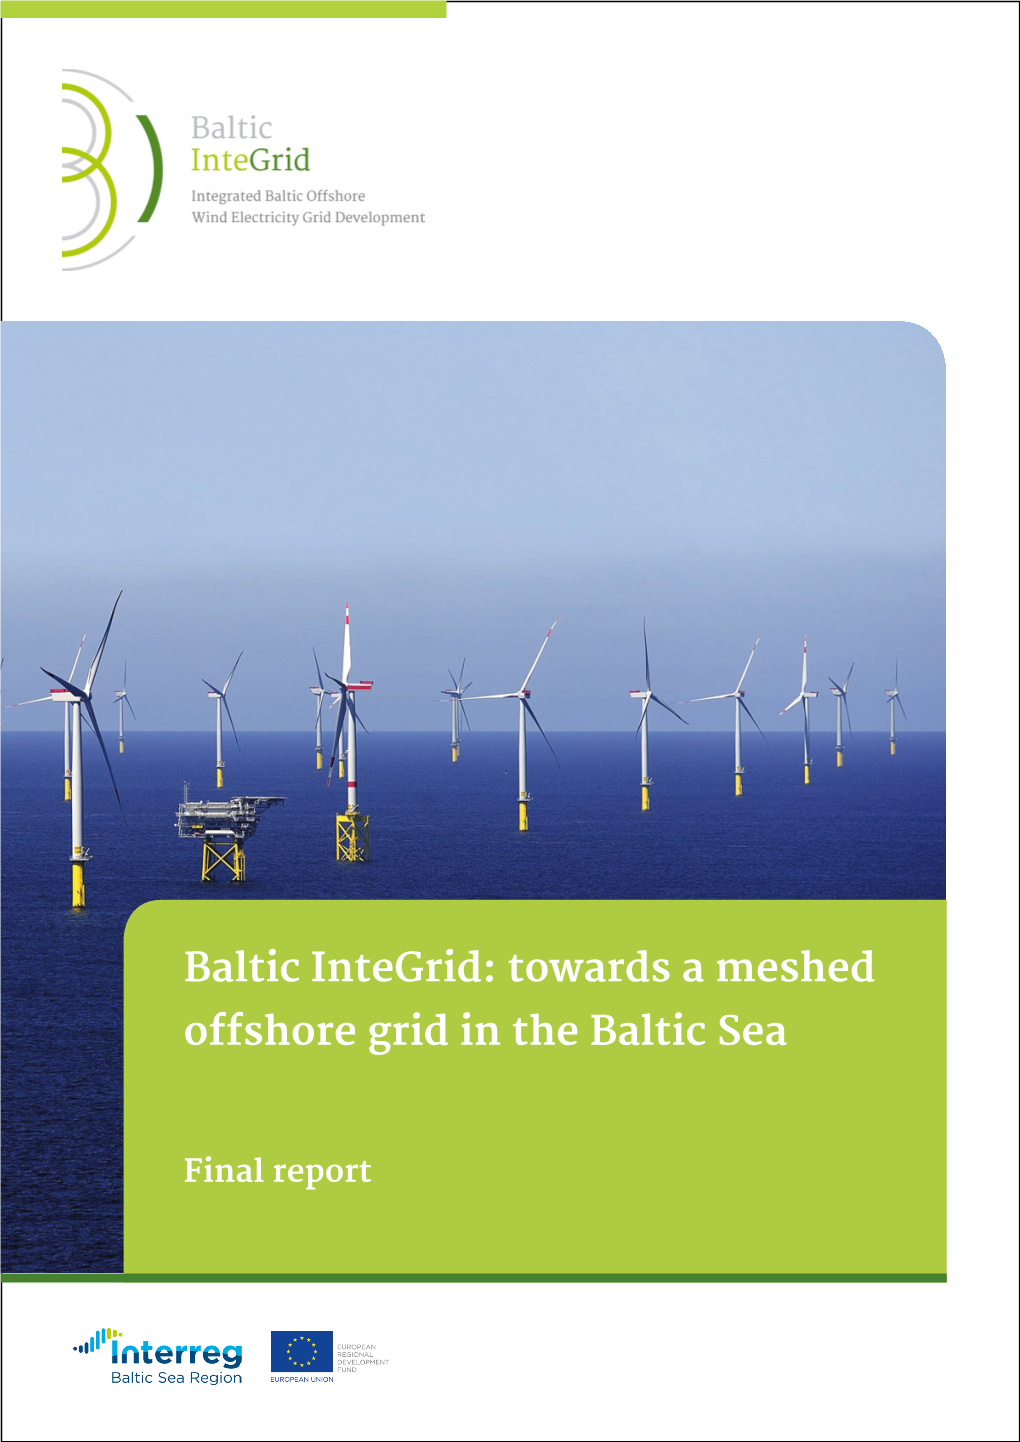 Towards a Meshed Offshore Grid in the Baltic Sea